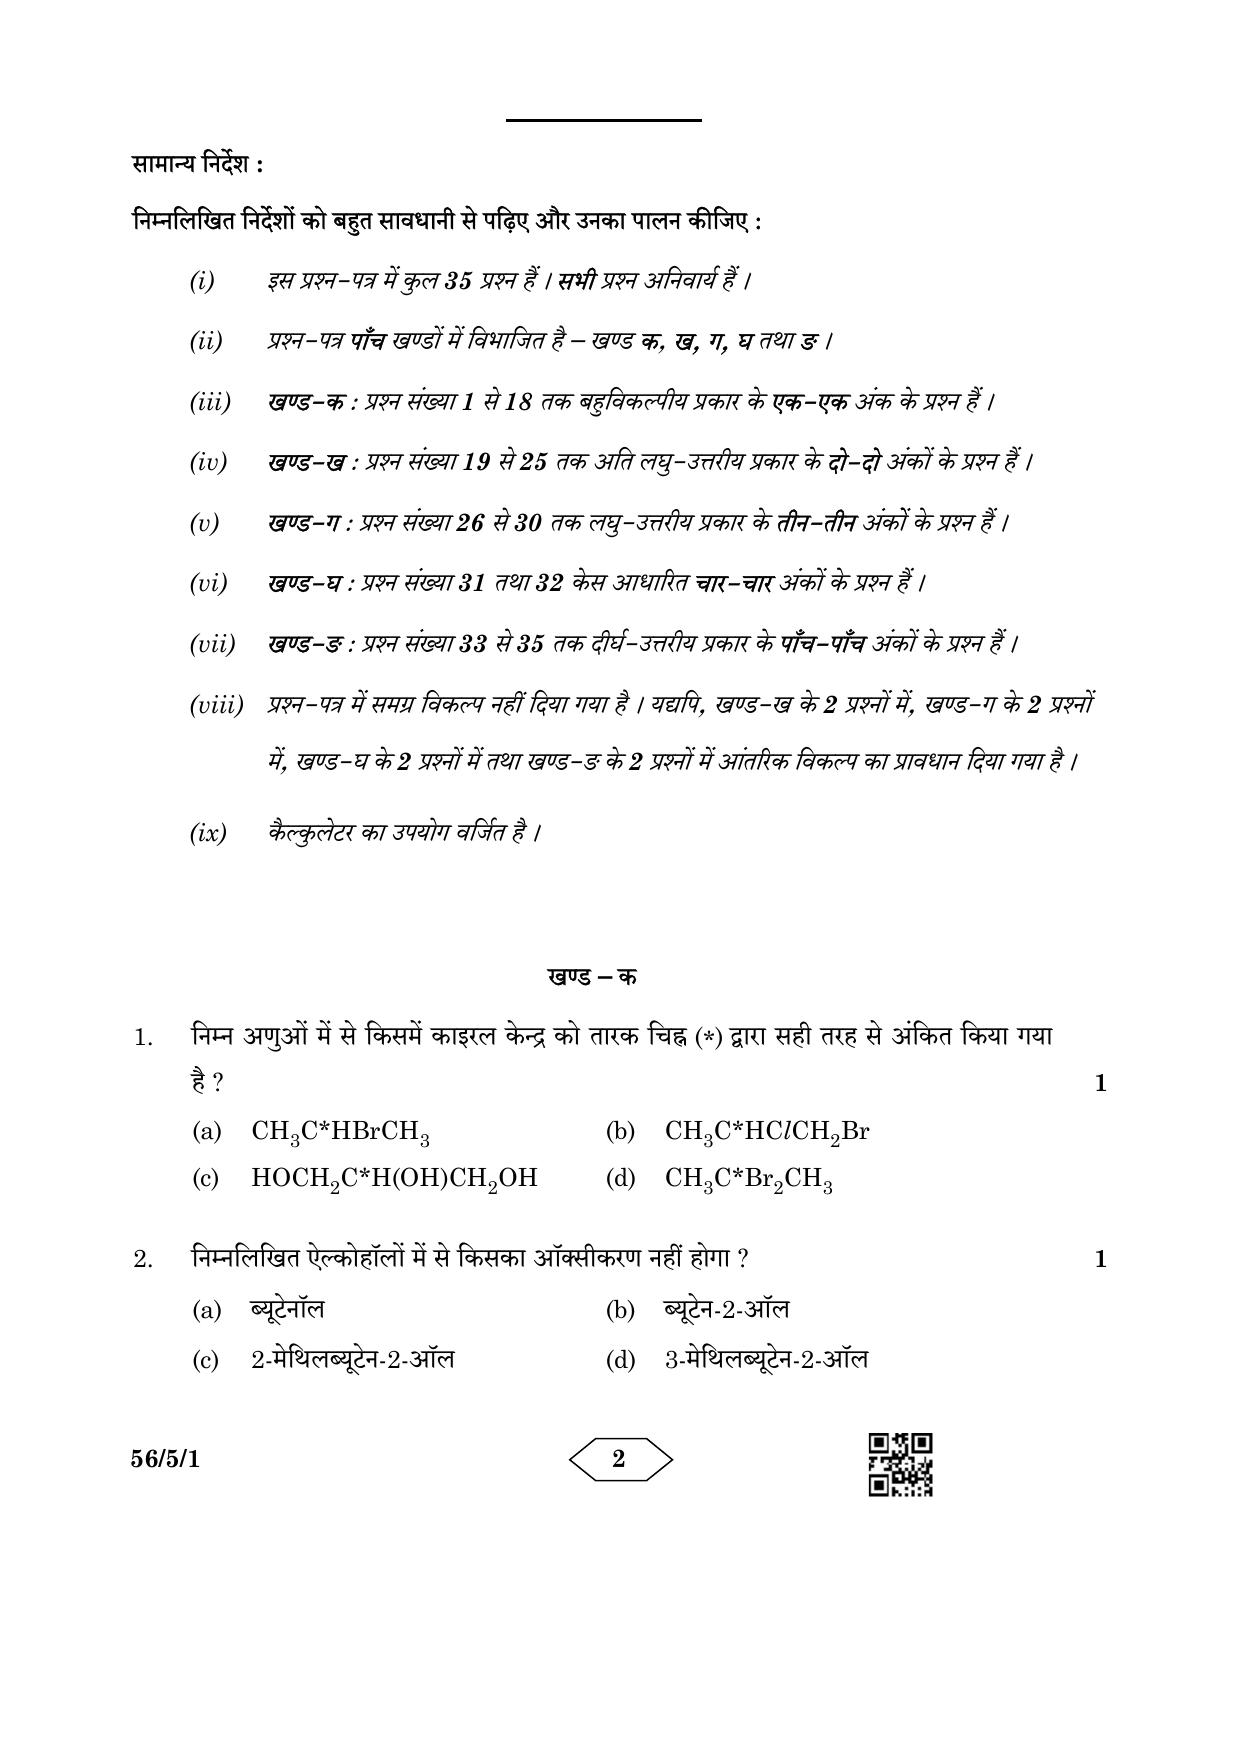 CBSE Class 12 56-5-1 Chemistry 2023 Question Paper - Page 2